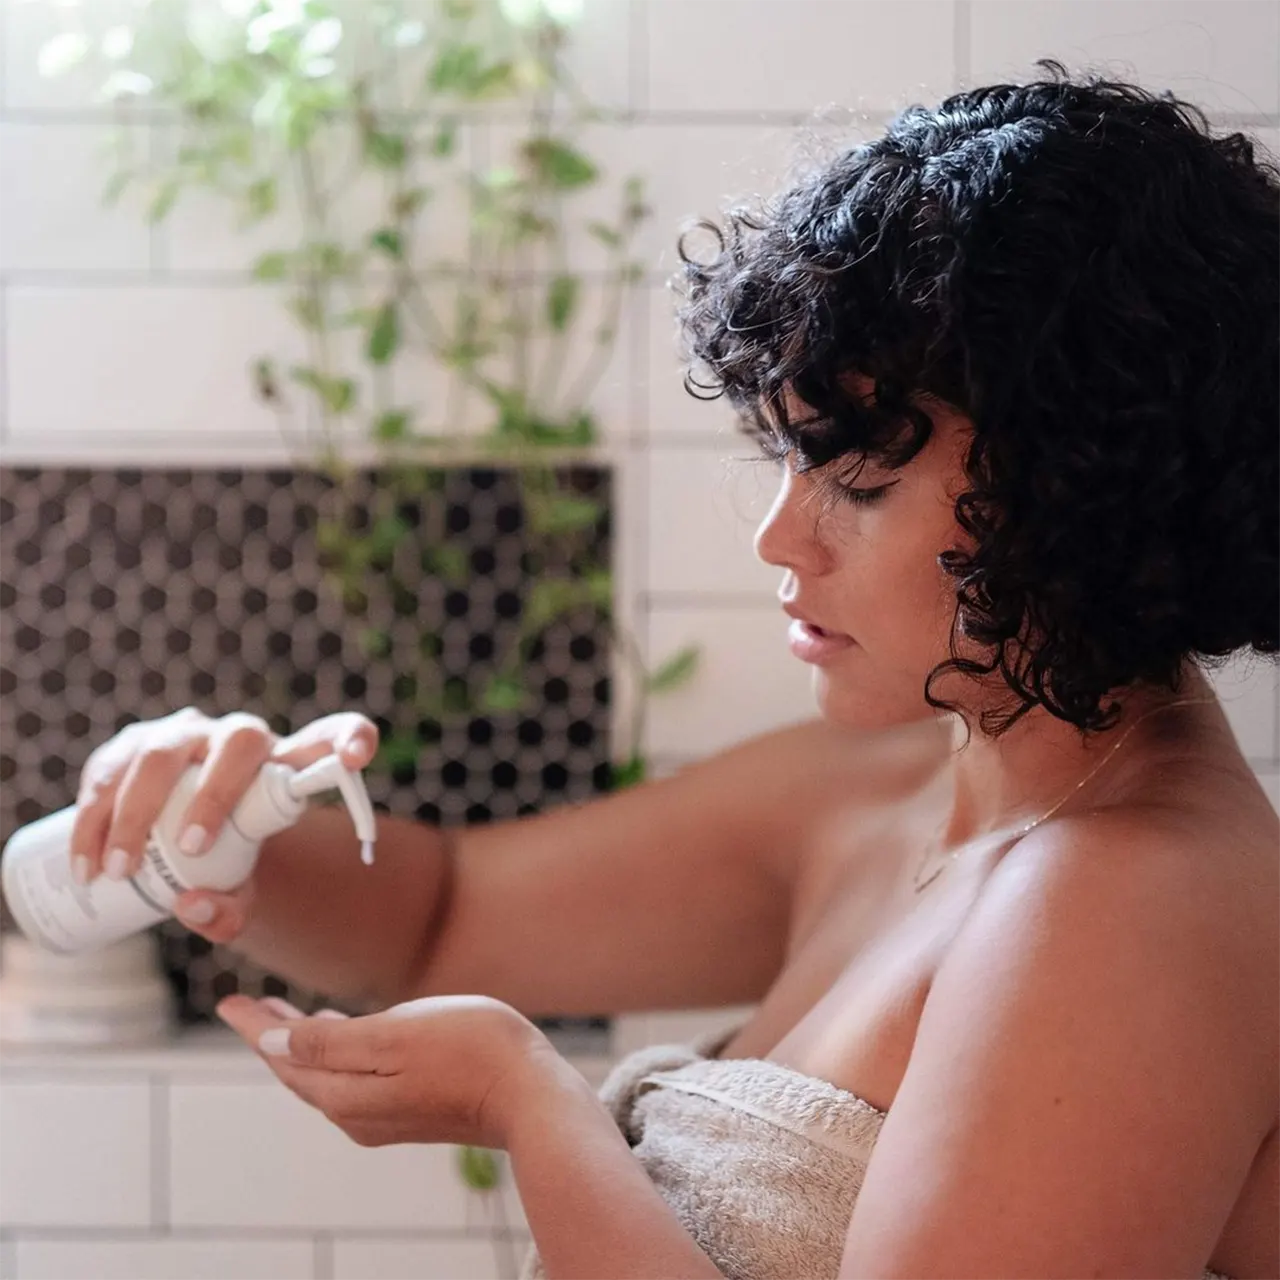 A woman is pouring shampoo into the palm of her hand.